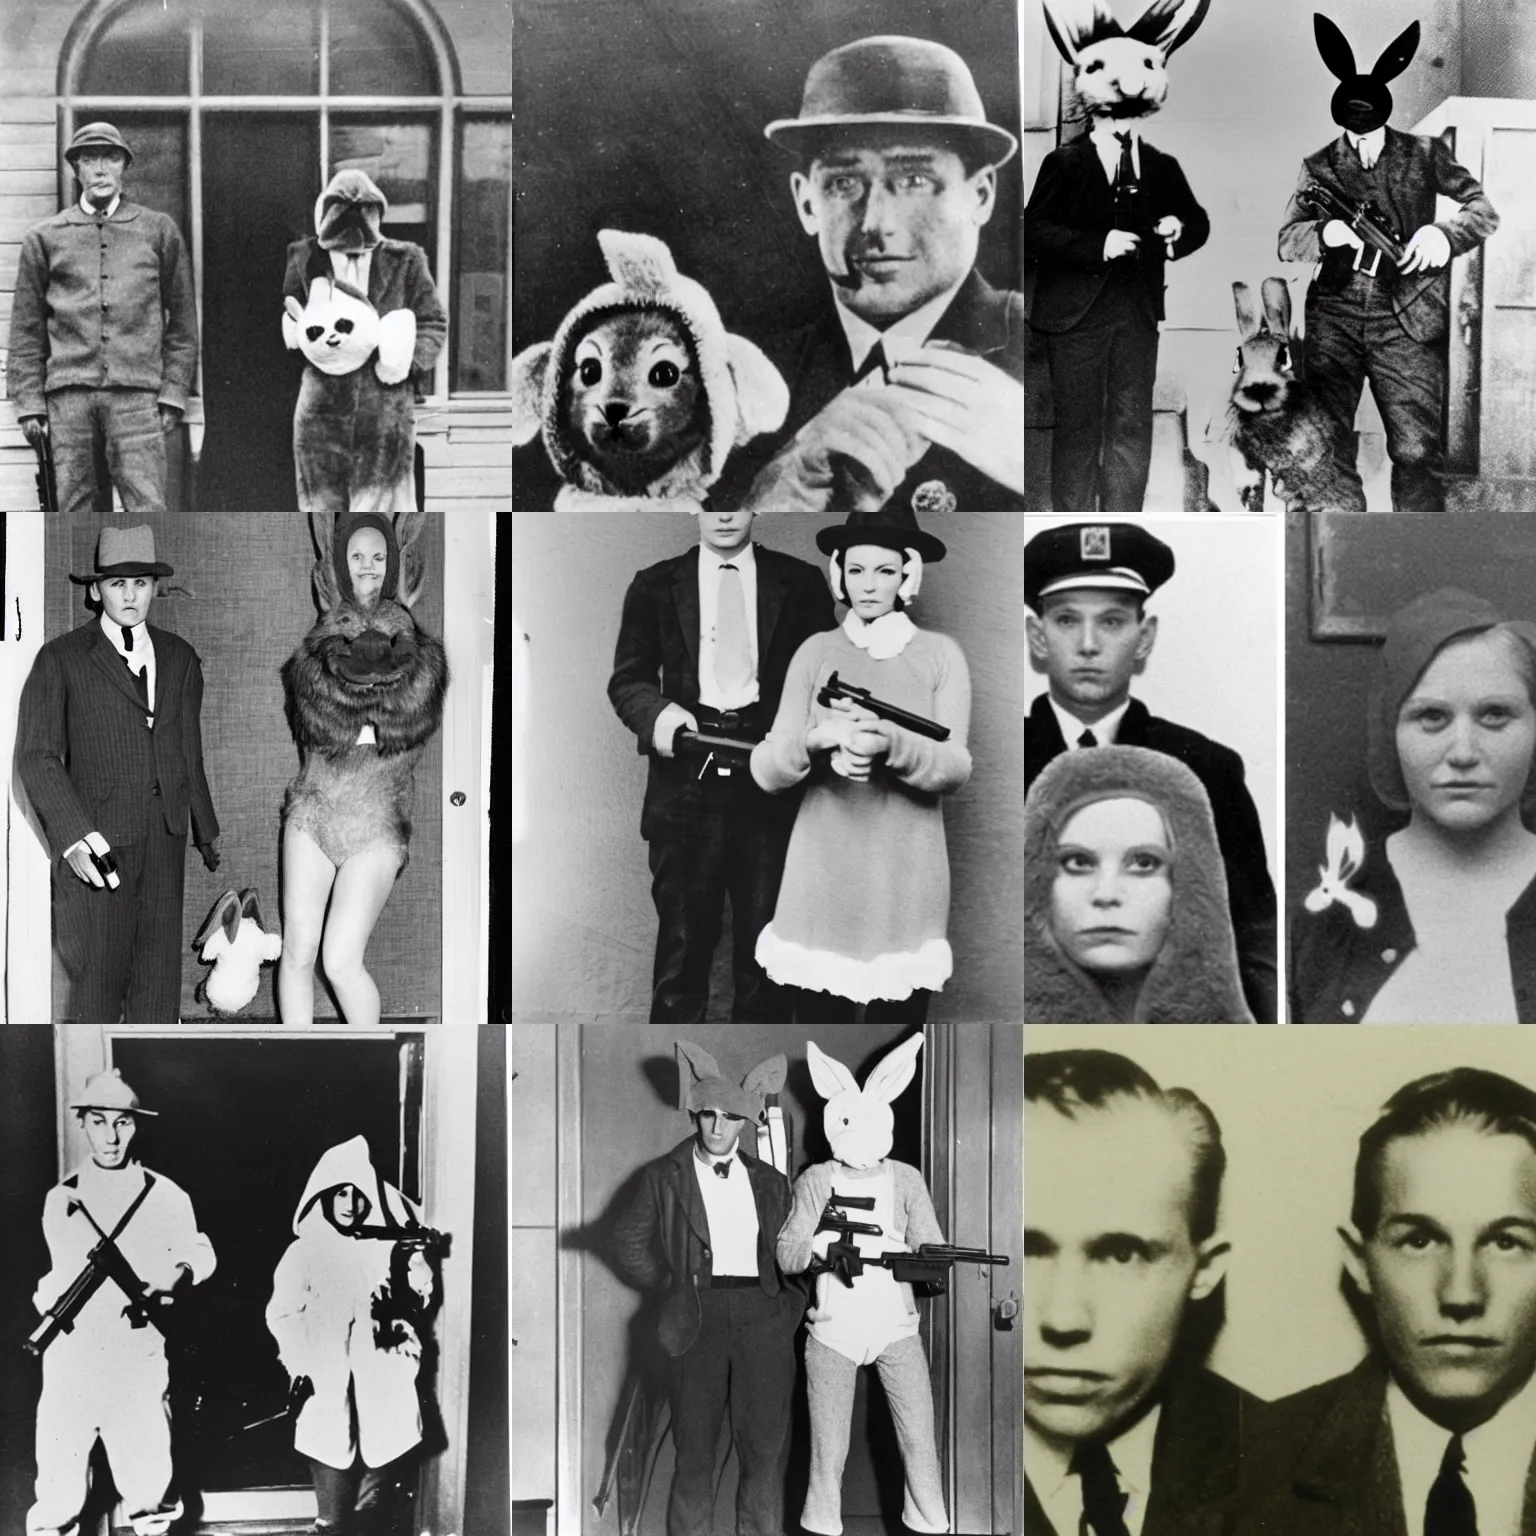 Prompt: Bonnie and Clyde wearing bunny costume, gun, bank robbery, police